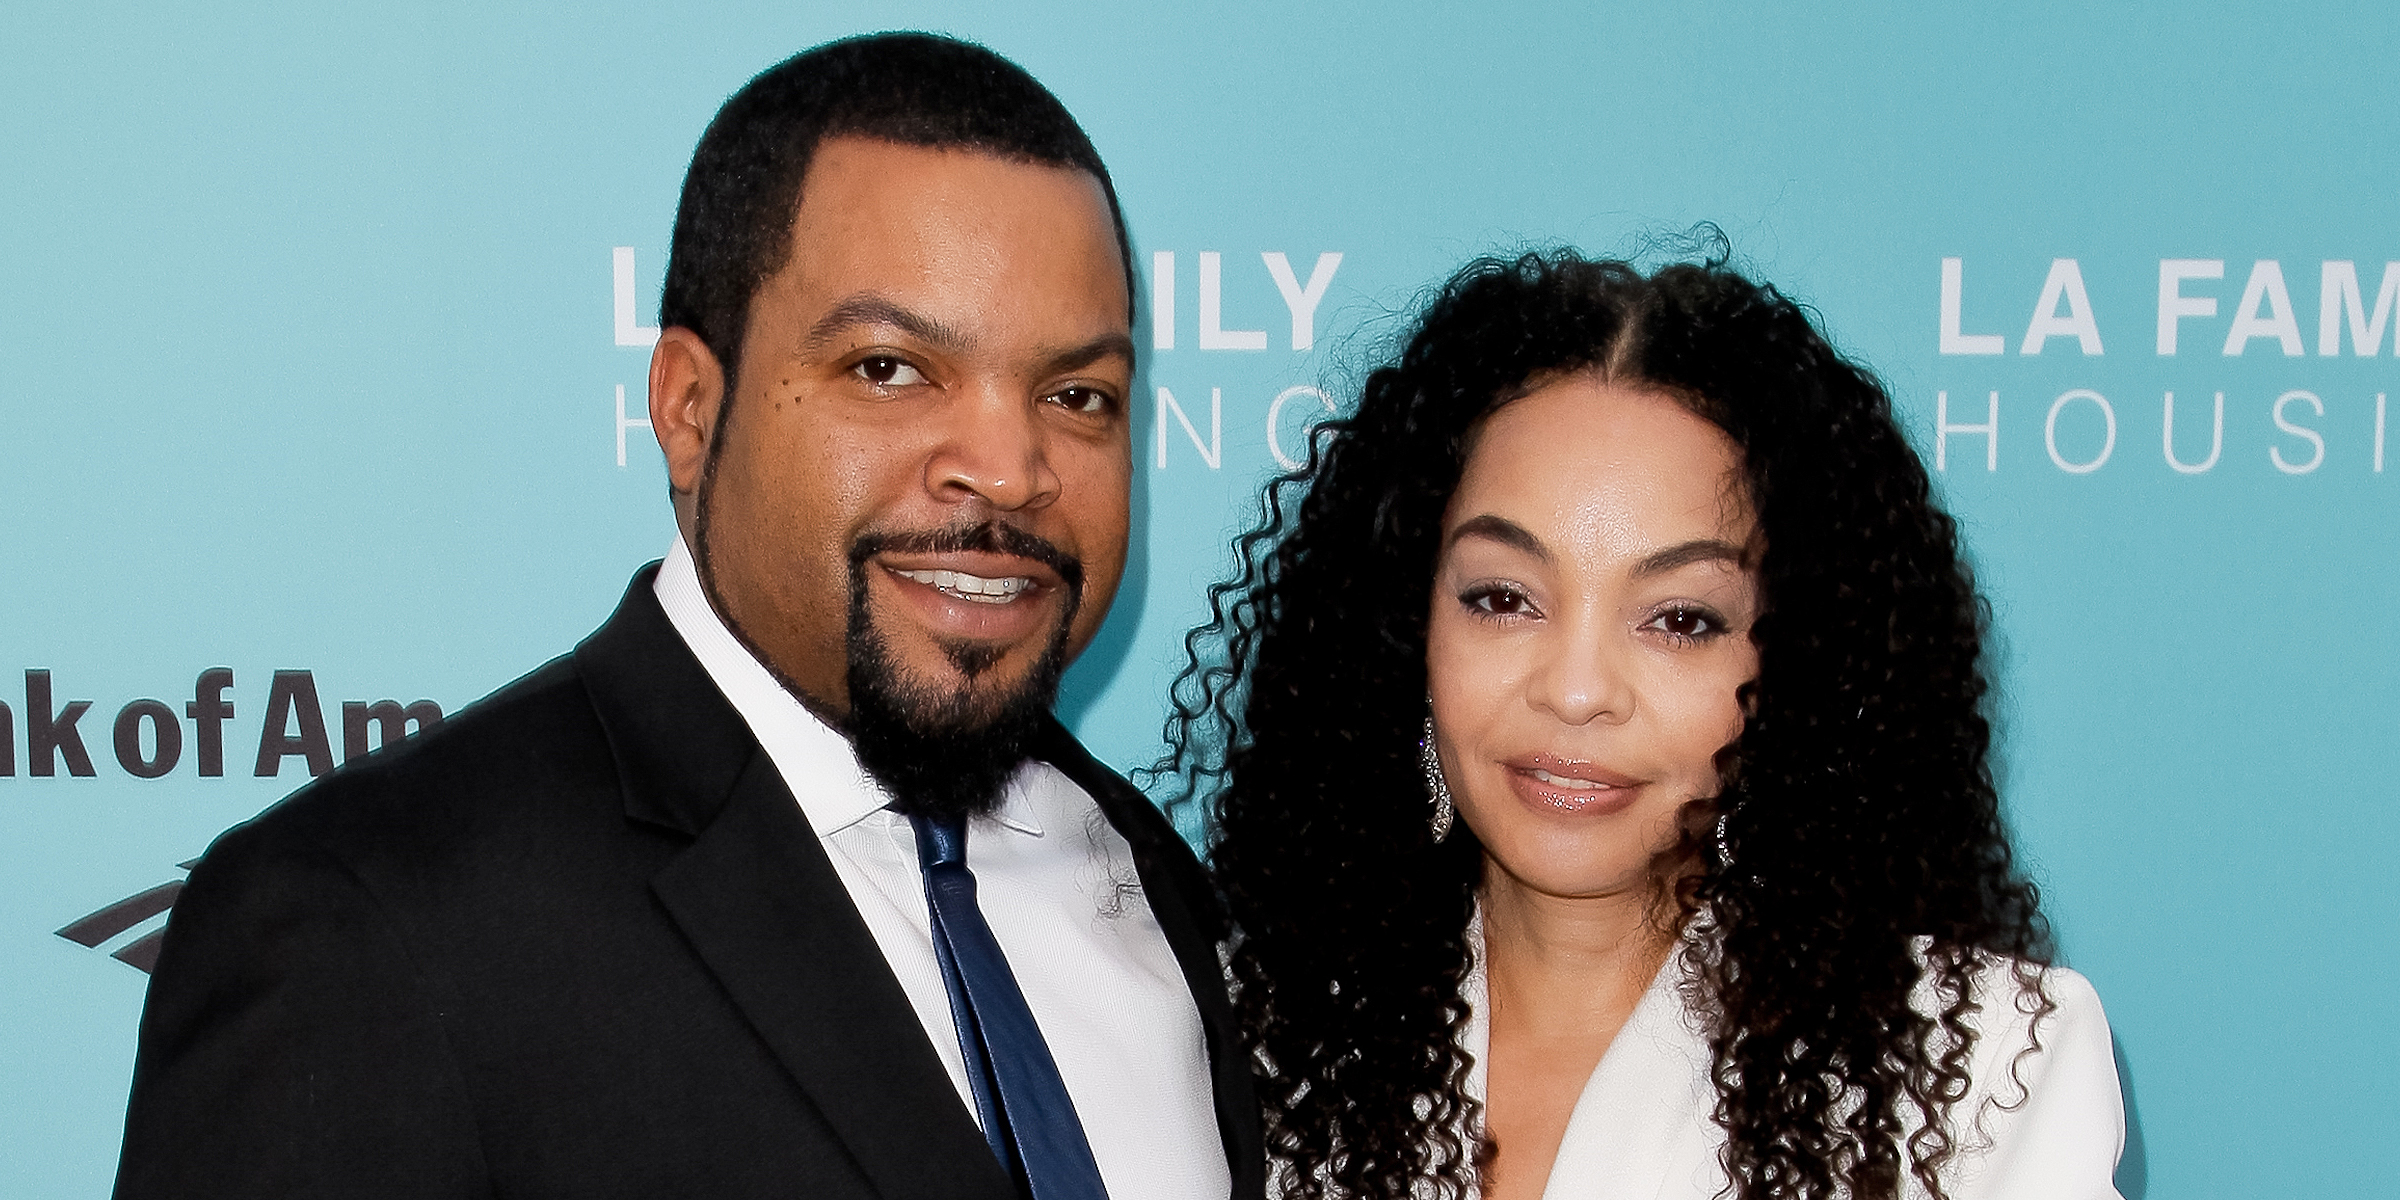 Ice Cube and Kimberly Woodruff attend the LA Family Housing 2017 Awards at The Lot on April 27, 2017, in West Hollywood, California. | Source: Getty Images